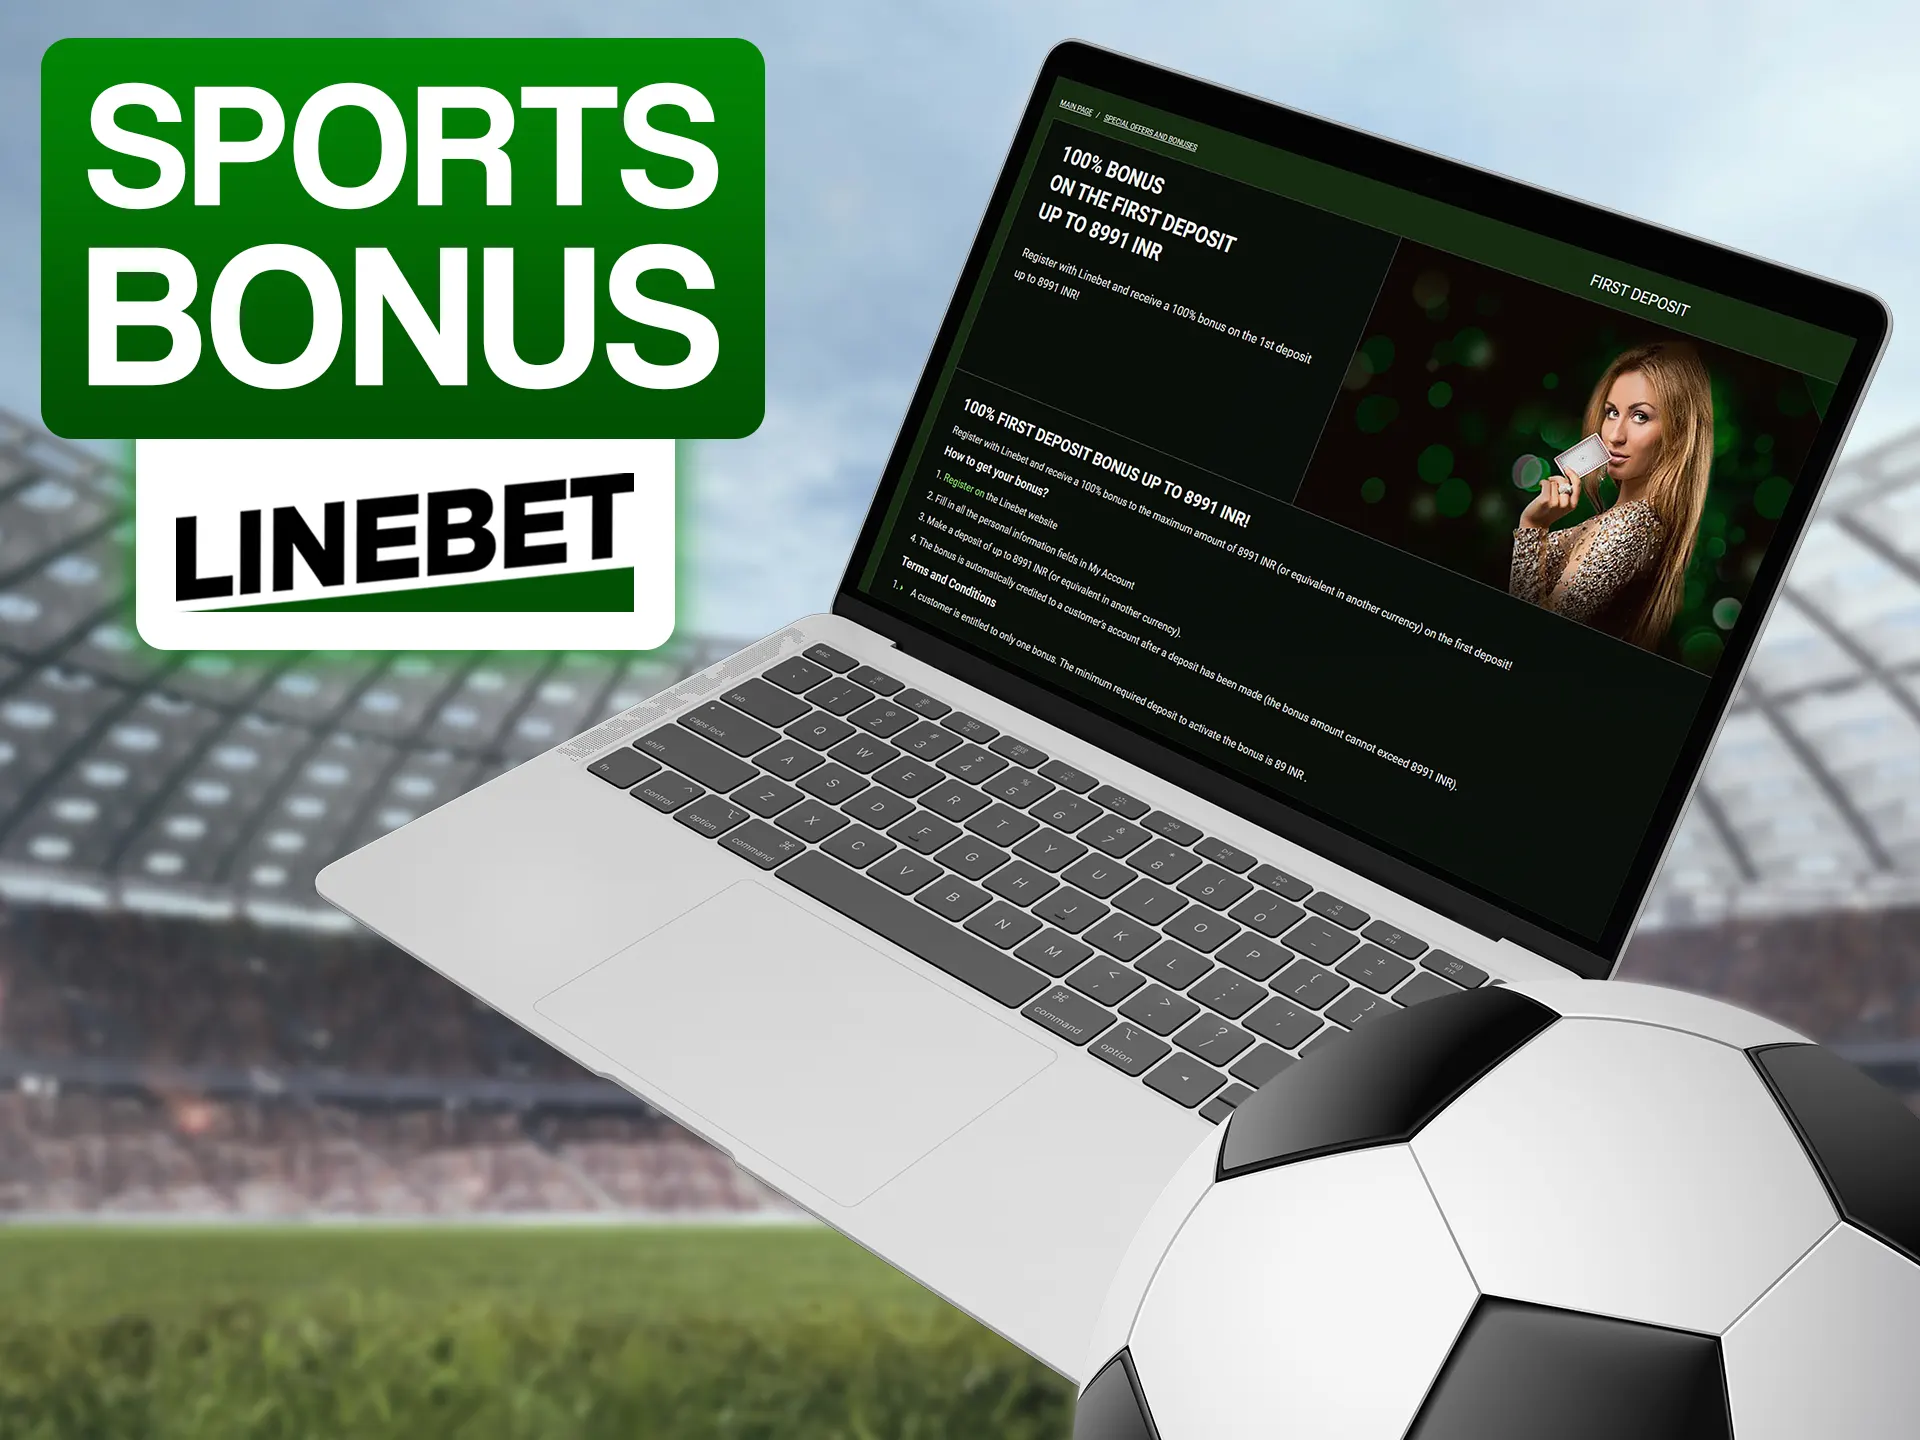 Bet on sports and get your Linebet bonus.